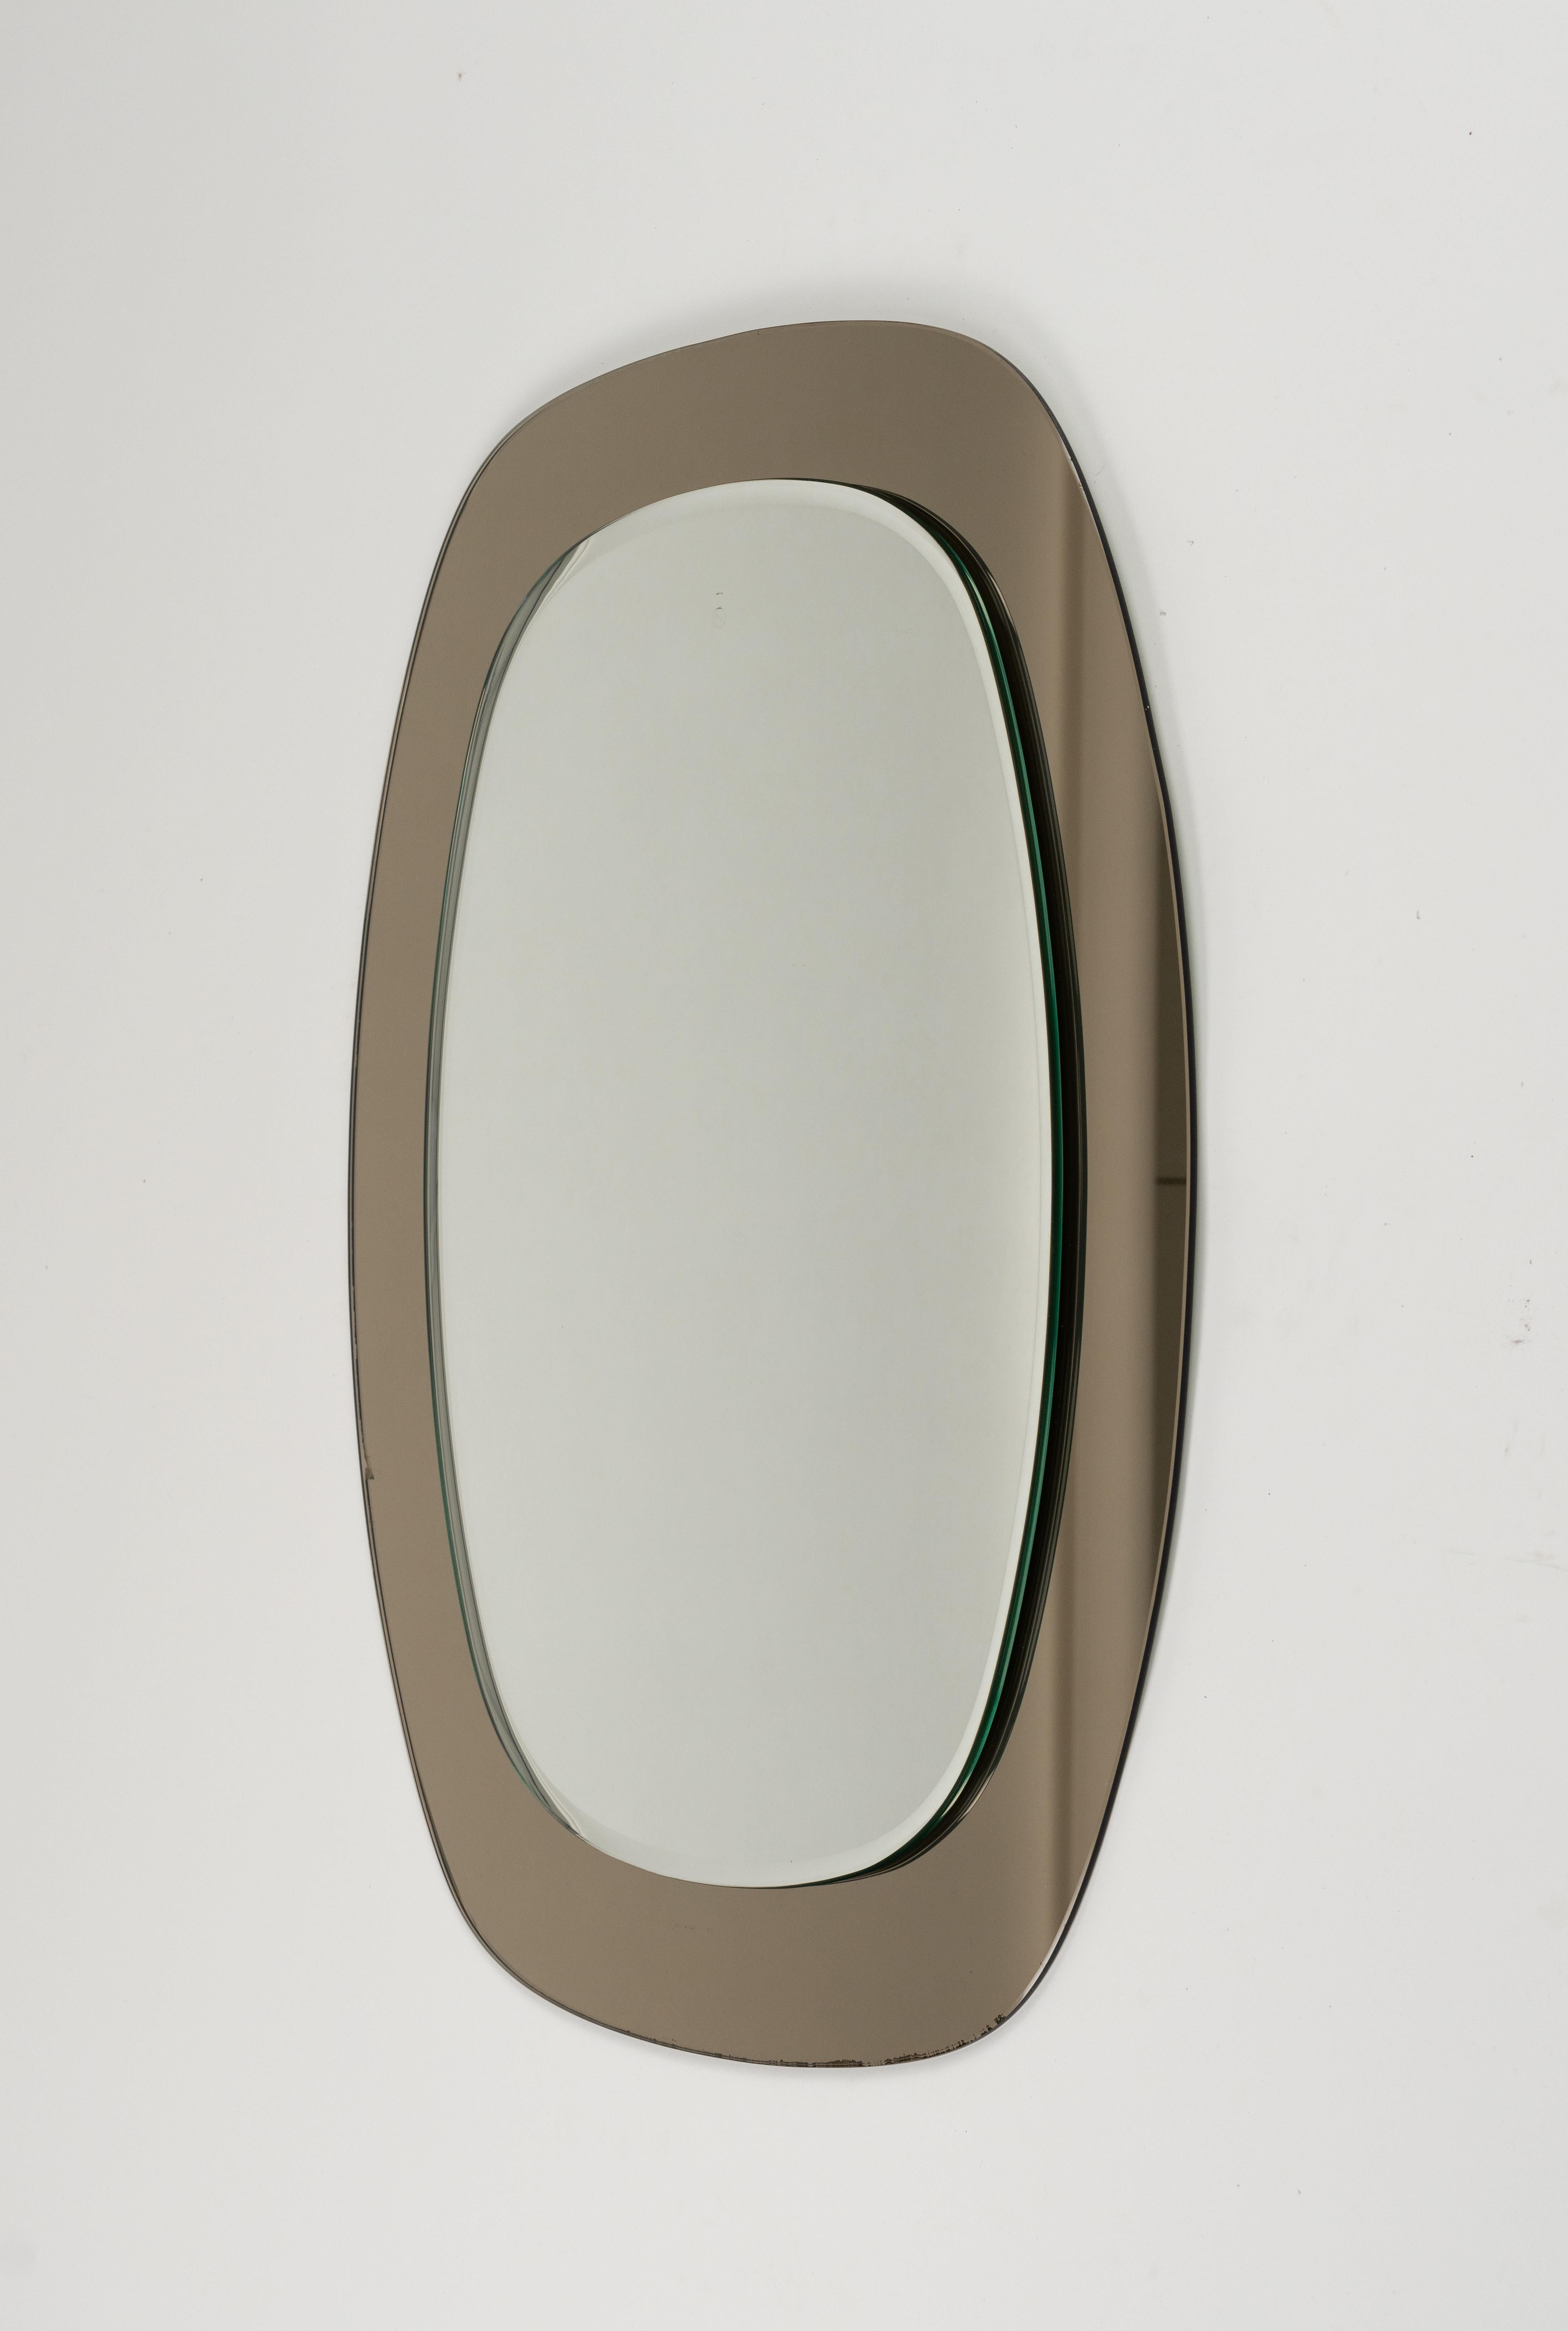 Midcentury Cristal Art Oval Wall Mirror with Smoked Frame, Italy 1960s For Sale 1